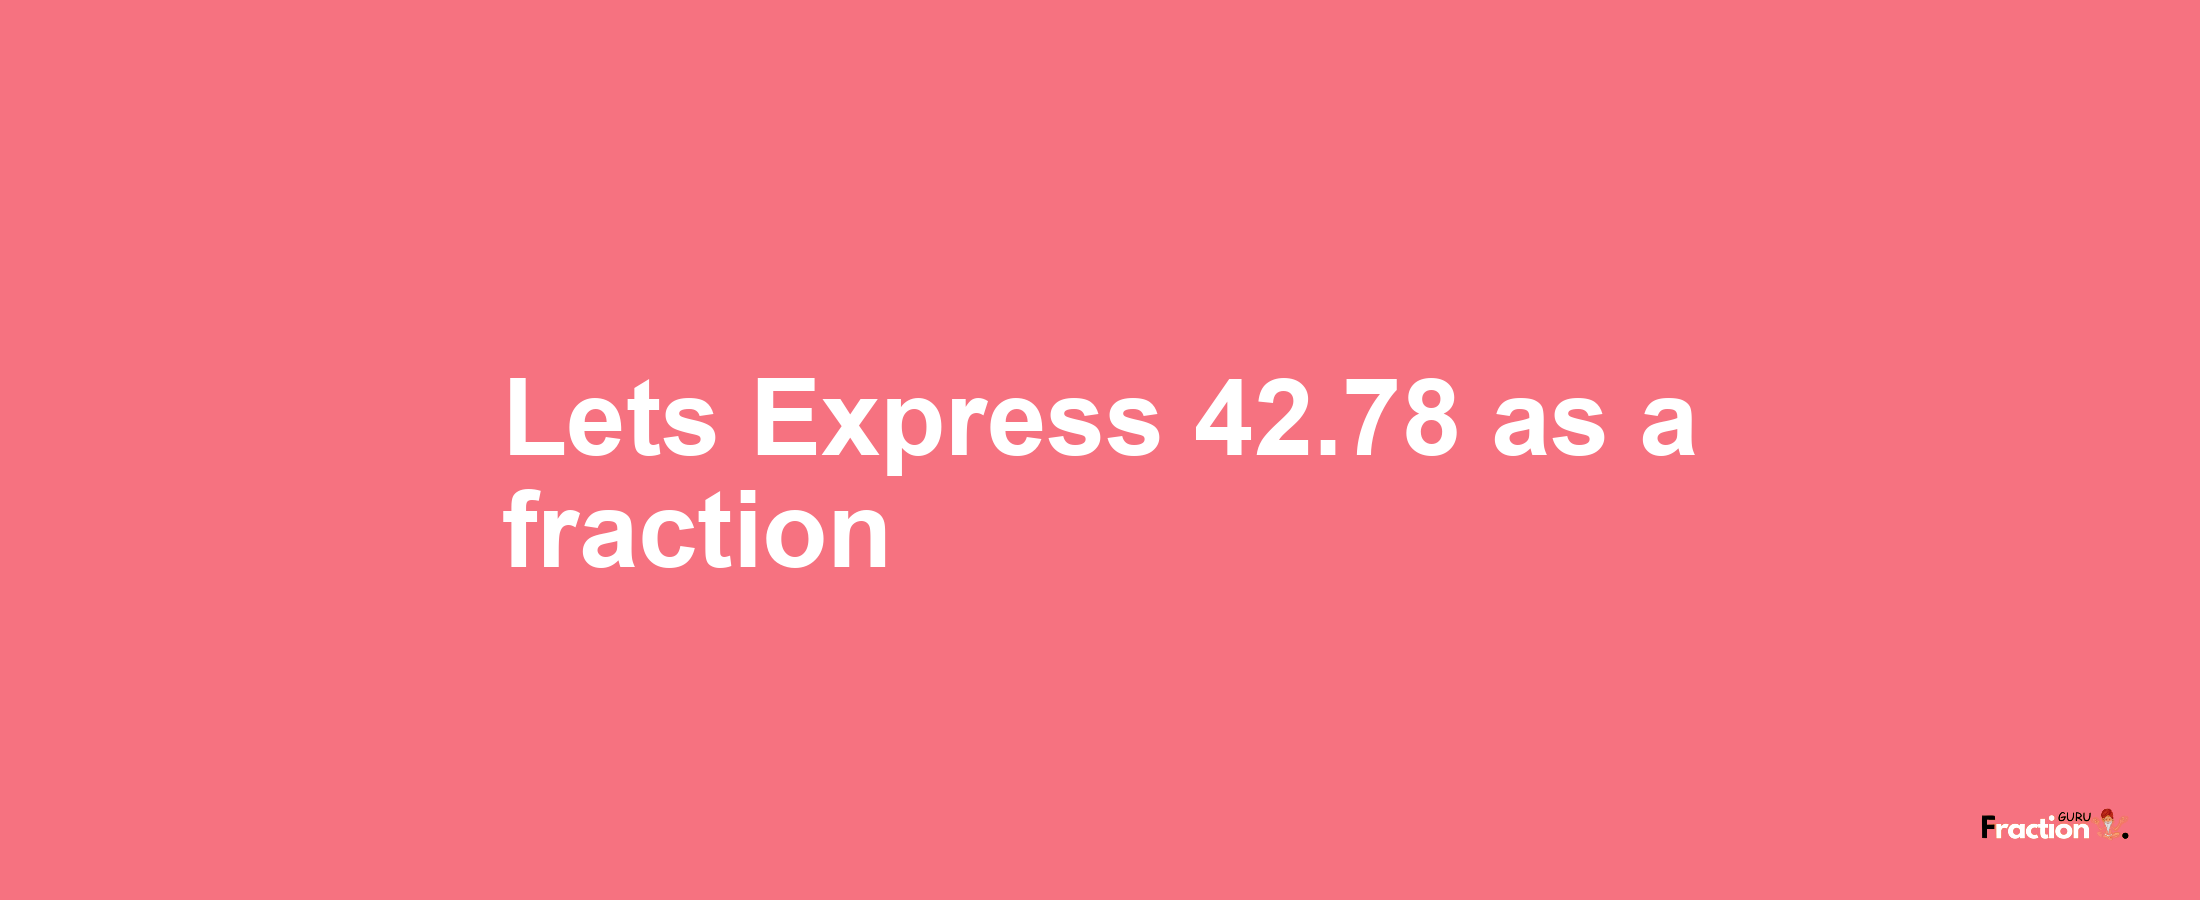 Lets Express 42.78 as afraction